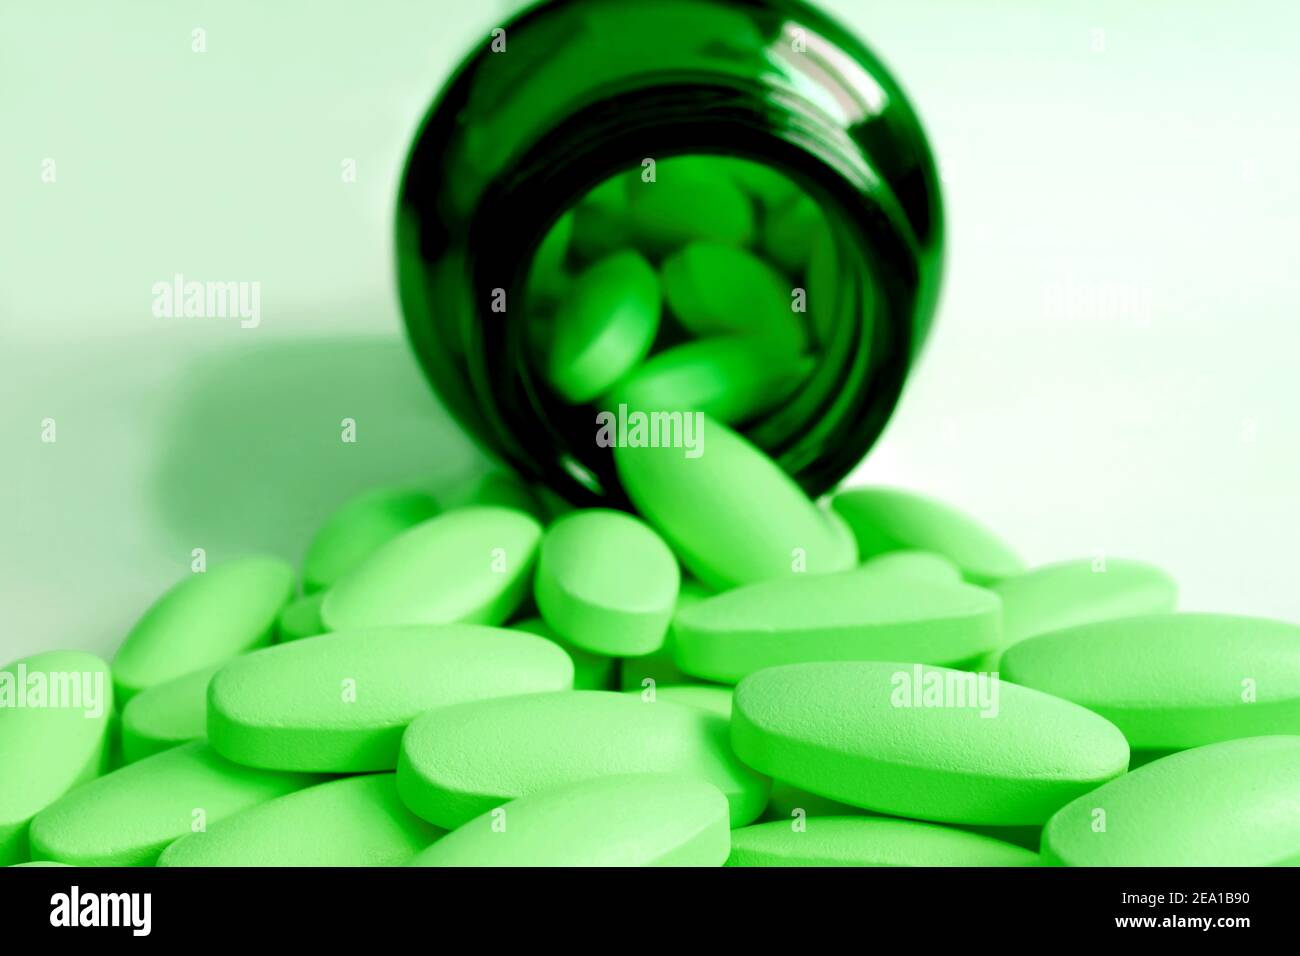 Bright Lime green pills poured from dark green glass bottle on the table Stock Photo